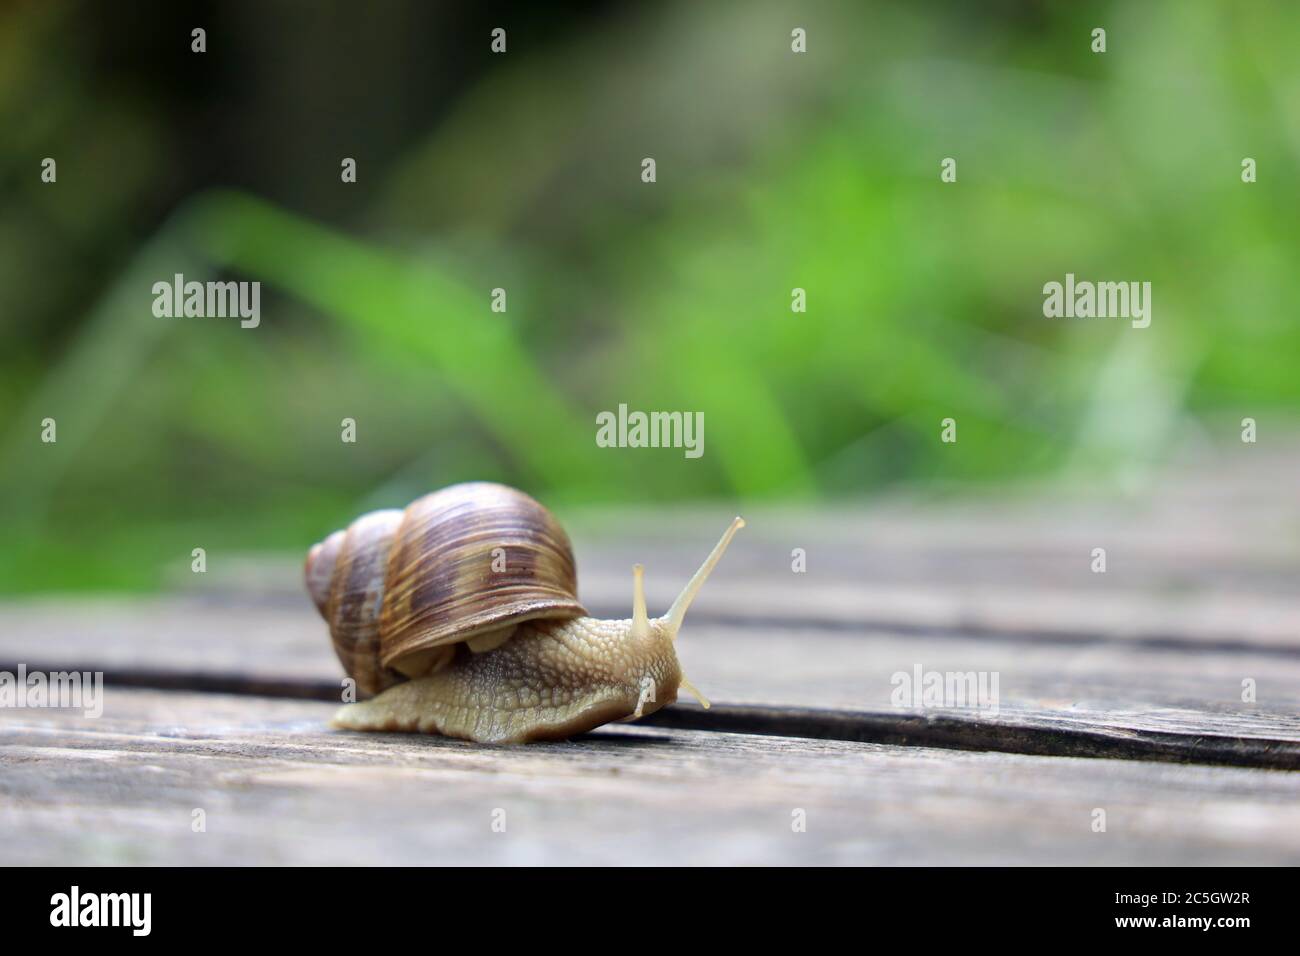 Helix pomatia, Roman snail, is crawling in garden after the rain, background with copy space Stock Photo